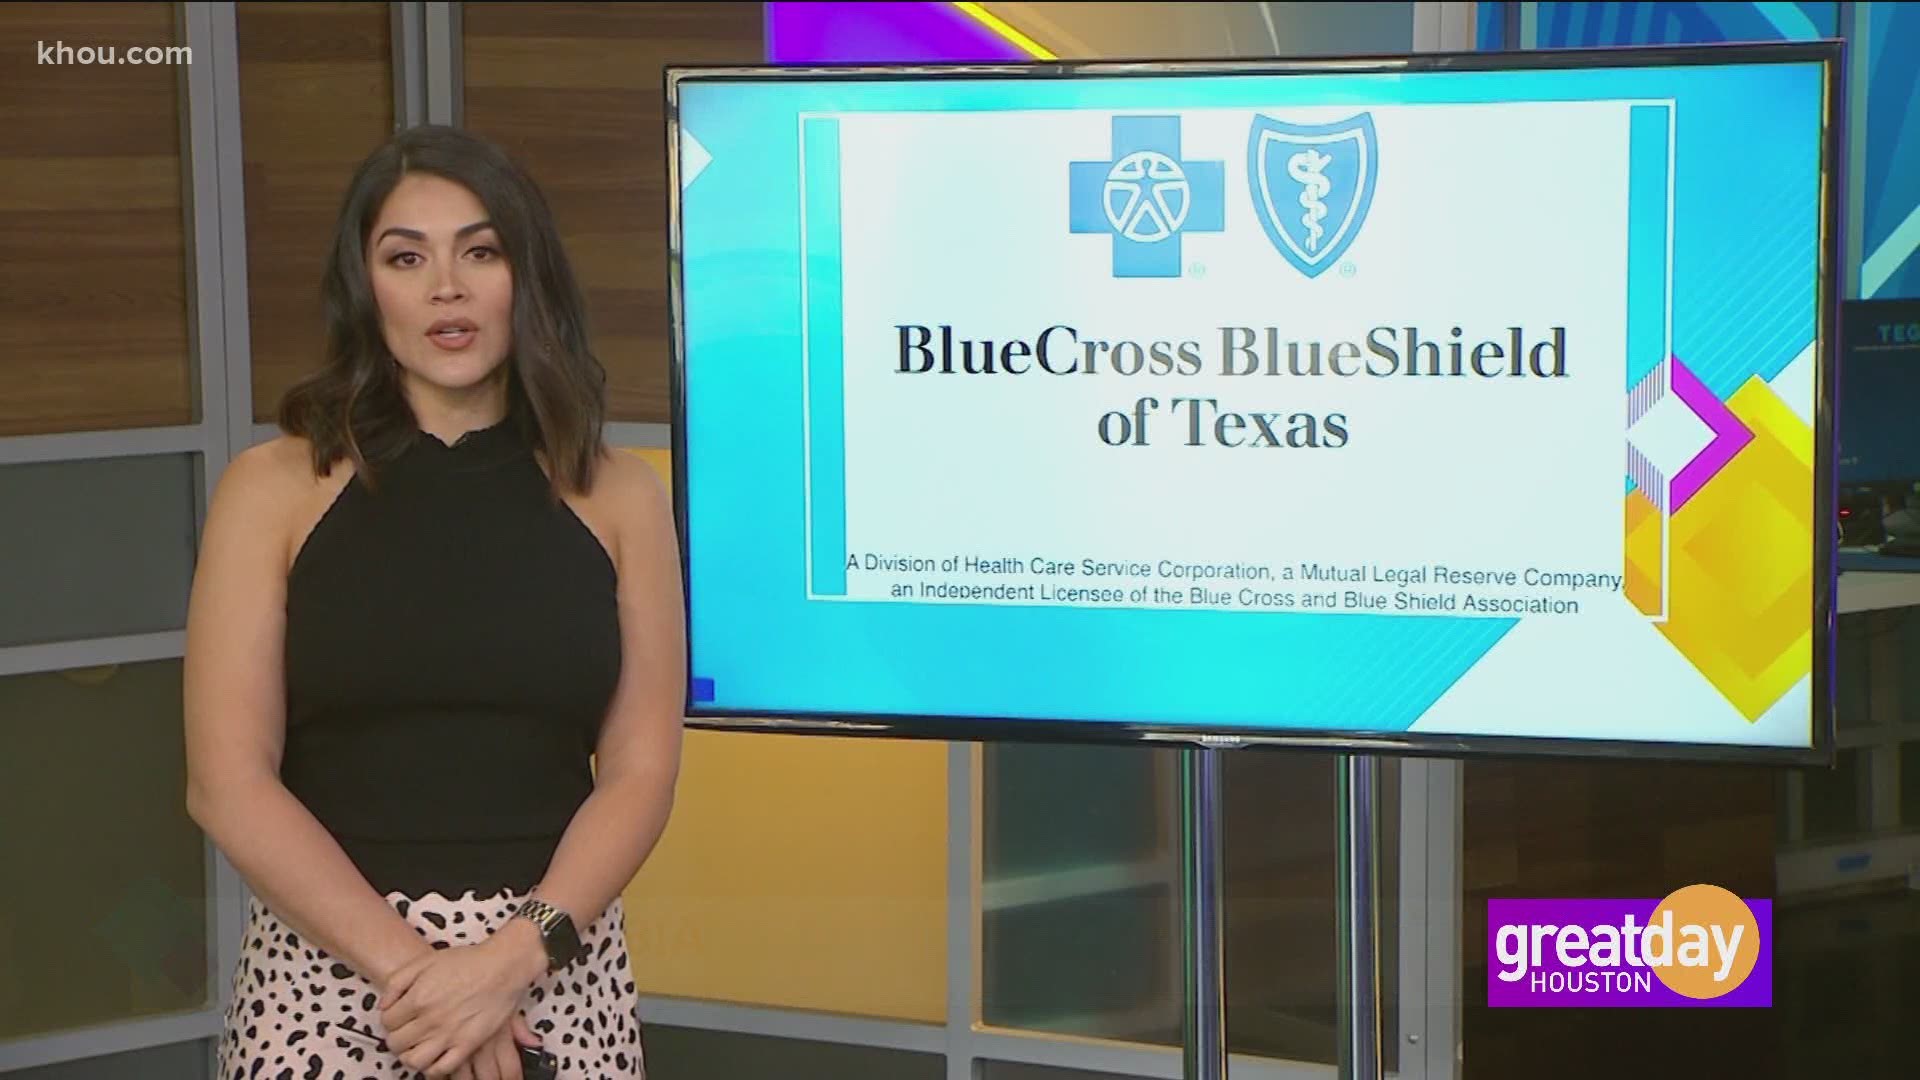 Shara McClure with Blue Cross and Blue Shield of Texas has helpful tips for your next virtual doctors visit